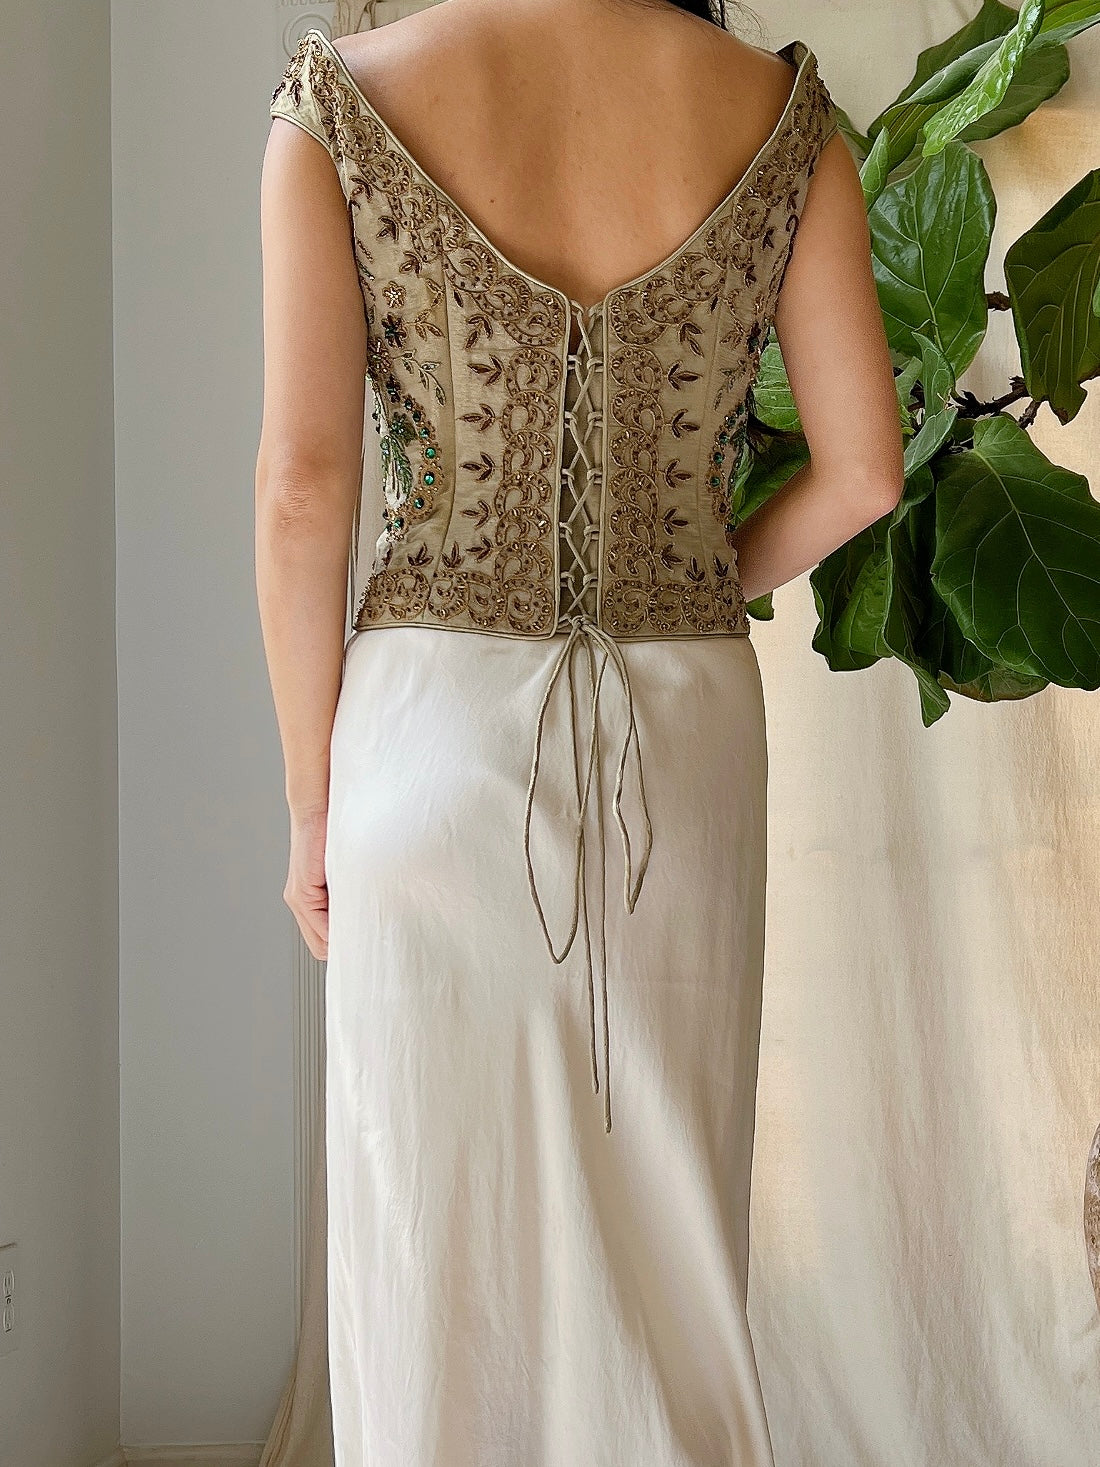 Vintage Embroidered Bustier - XL